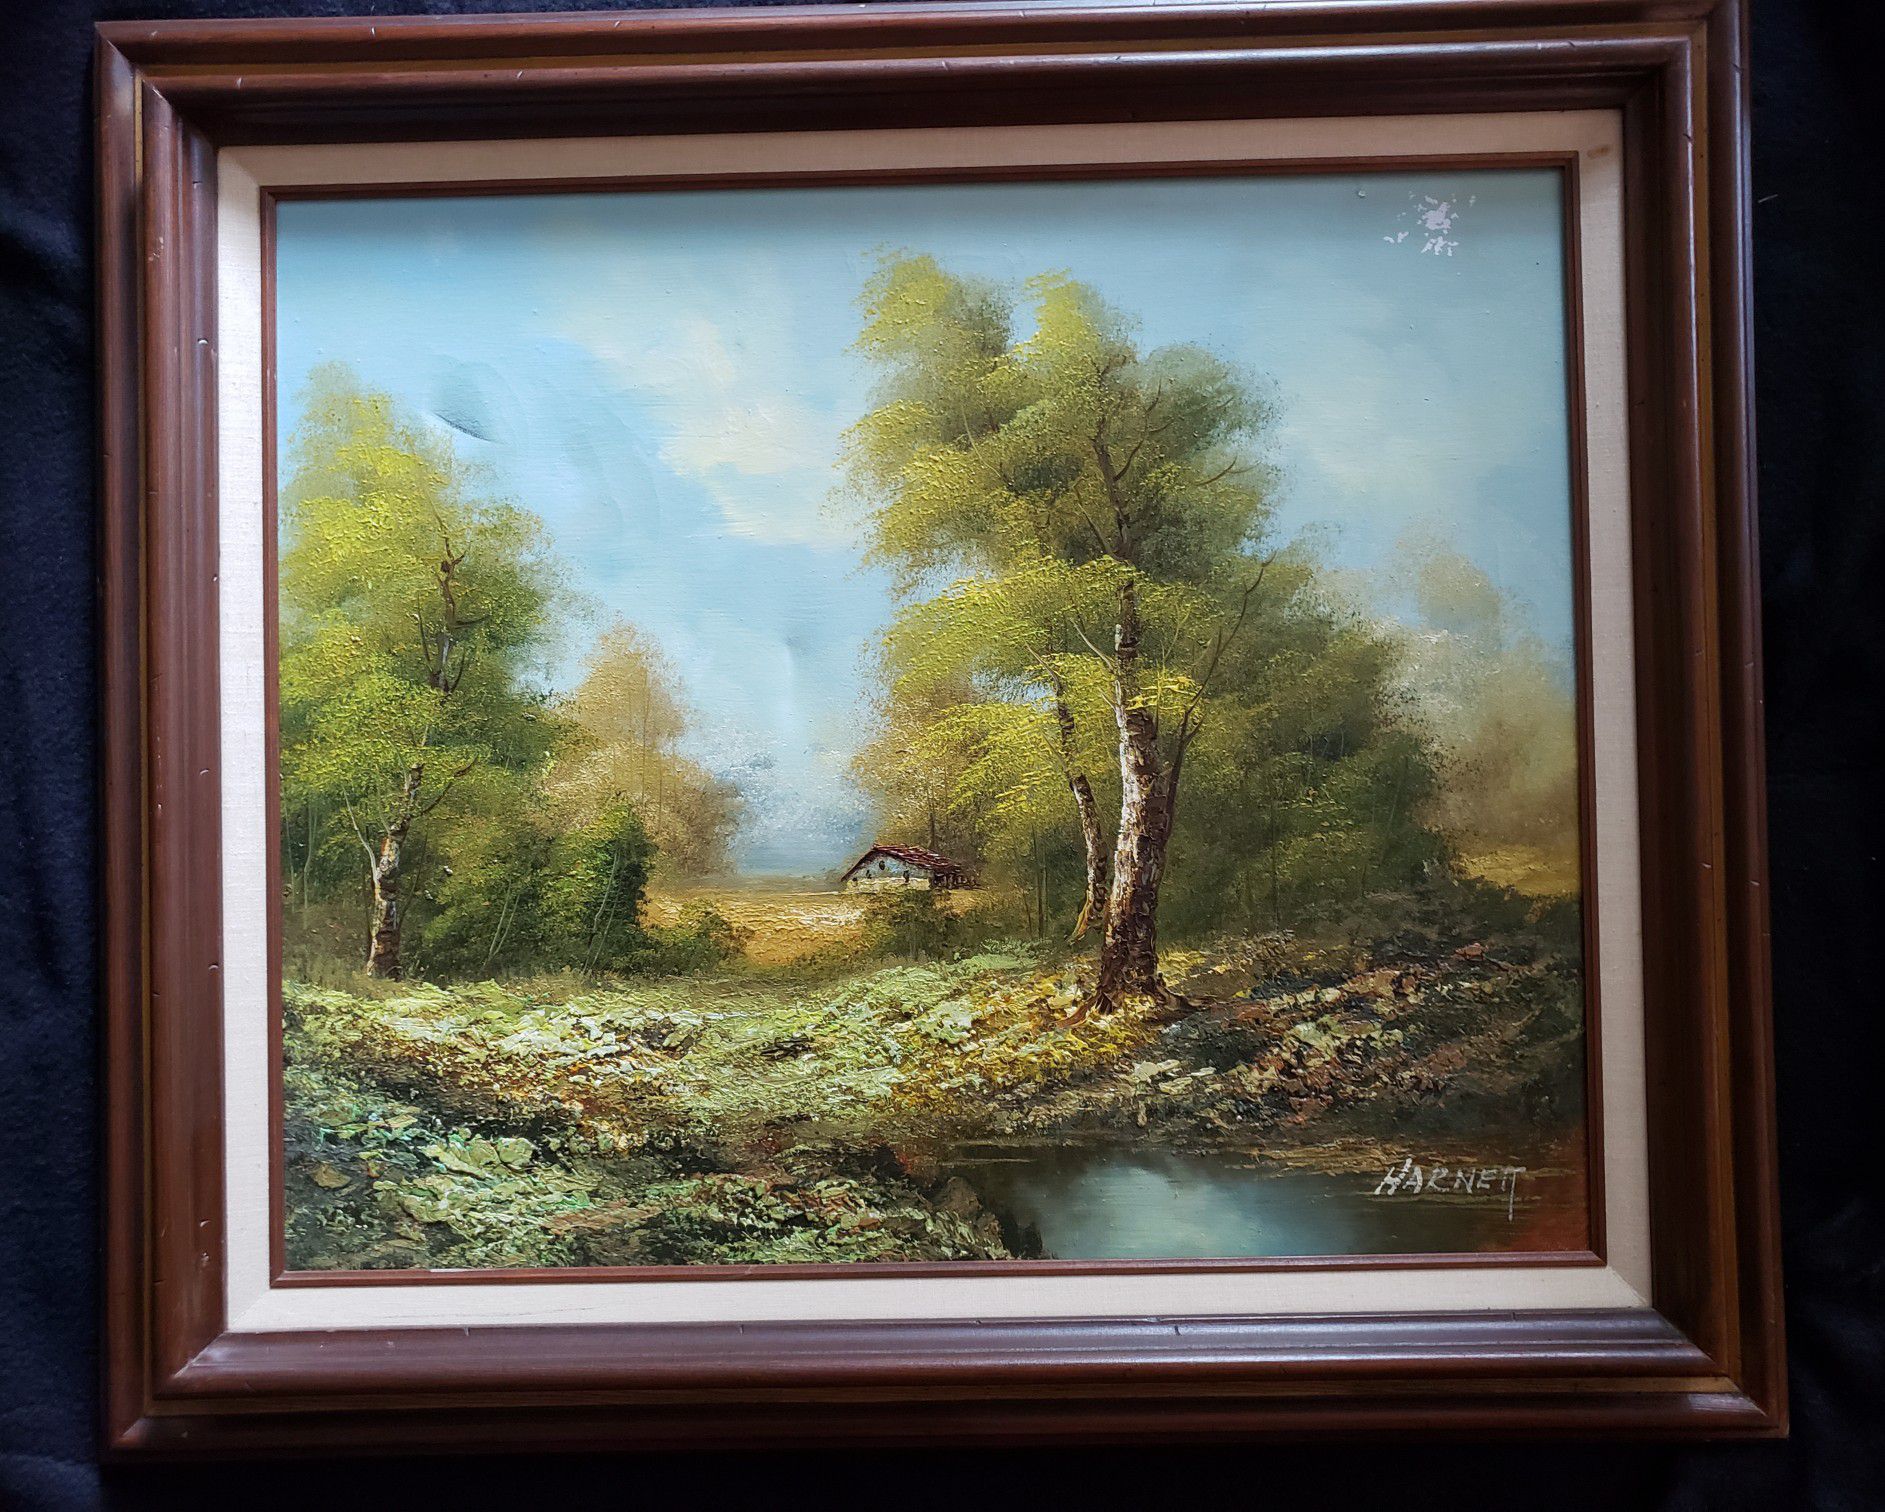 Vintage signed and certified Harnett painting